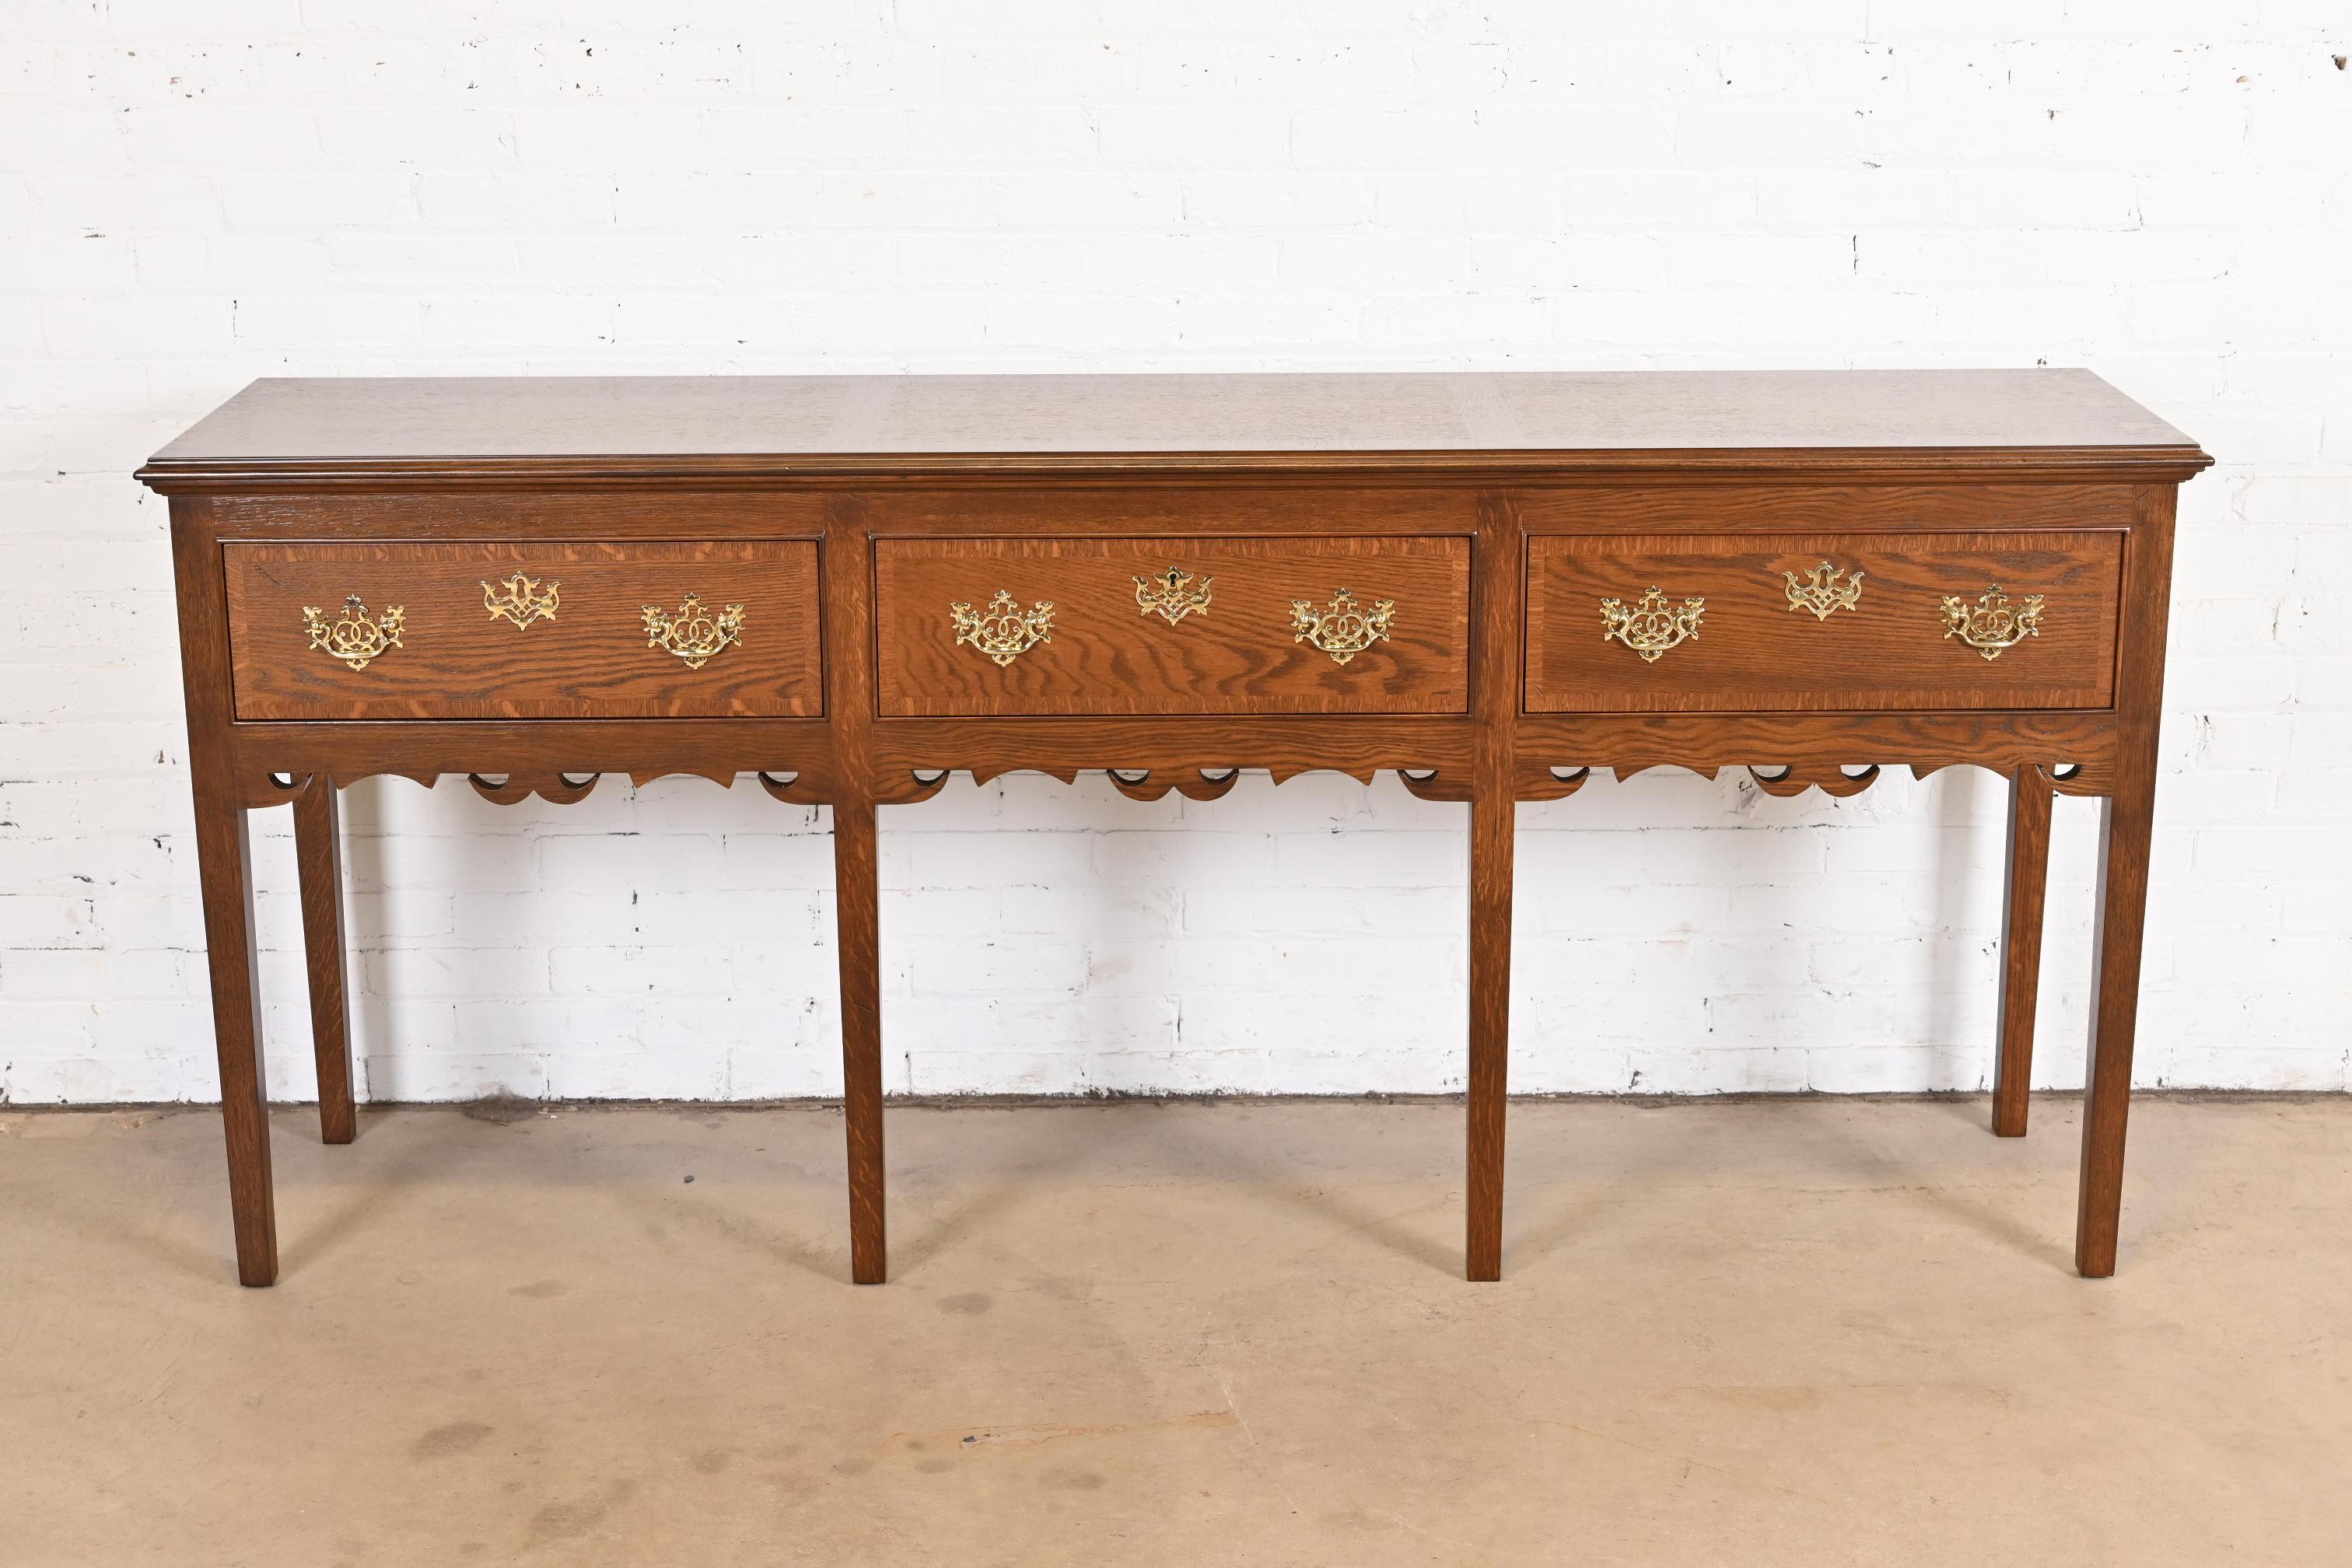 An exceptional English Georgian style sideboard, credenza, or hunt board
By Baker Furniture
USA, circa late 20th century.
Carved banded quarter sawn oak, with original brass hardware. Middle drawer locks, and original key is included.
Measures: 80